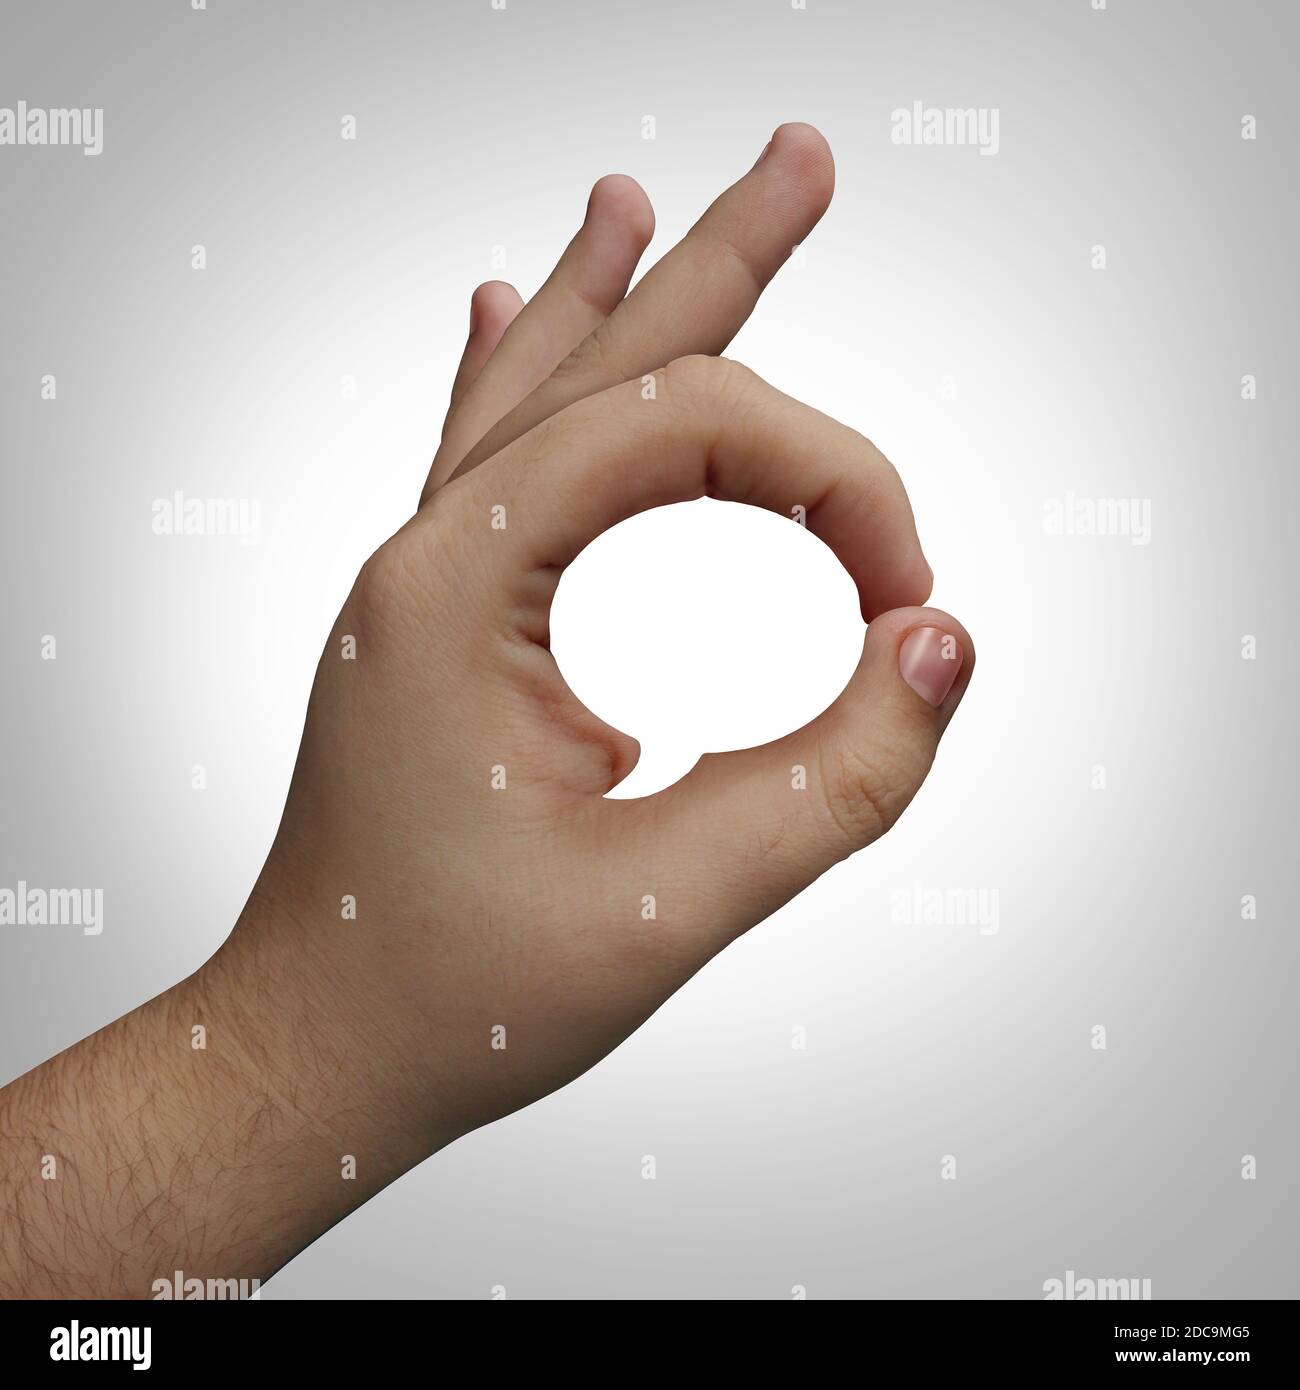 Body language concept and non-verbal or nonverbal communication with a hand making a gesture shaped as a word or speech bubble or deaf culture. Stock Photo